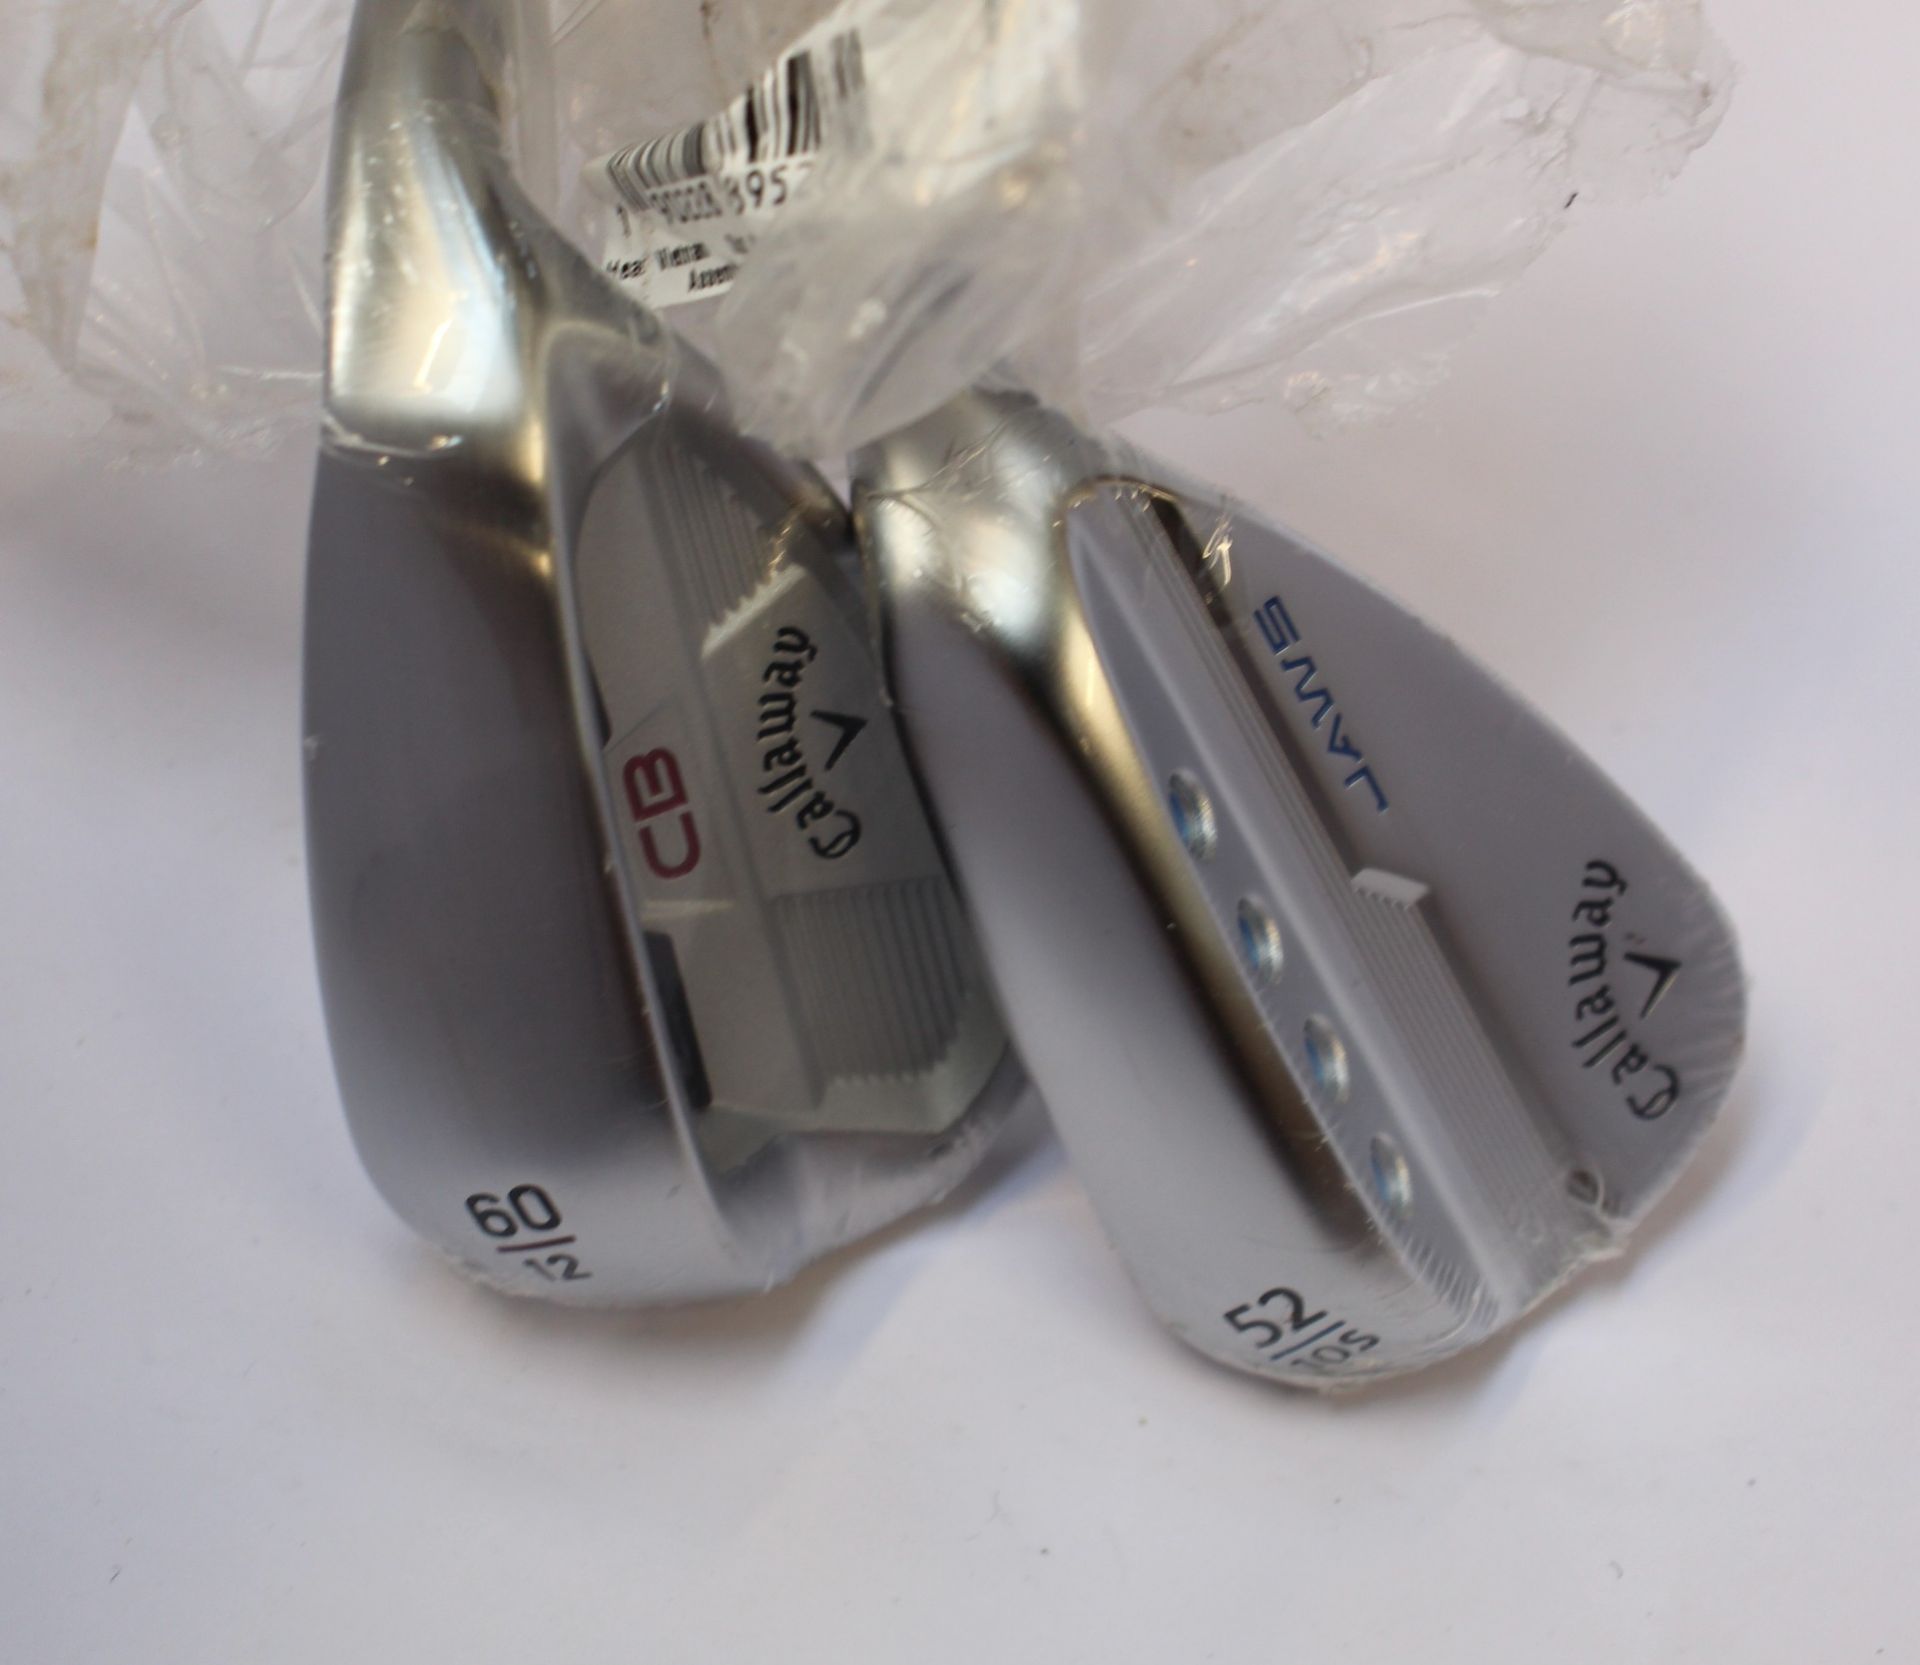 An as new Callaway Jaws MD5 52 wedge and an as new Callaway Mack Daddy CB 60 wedge (Both right-